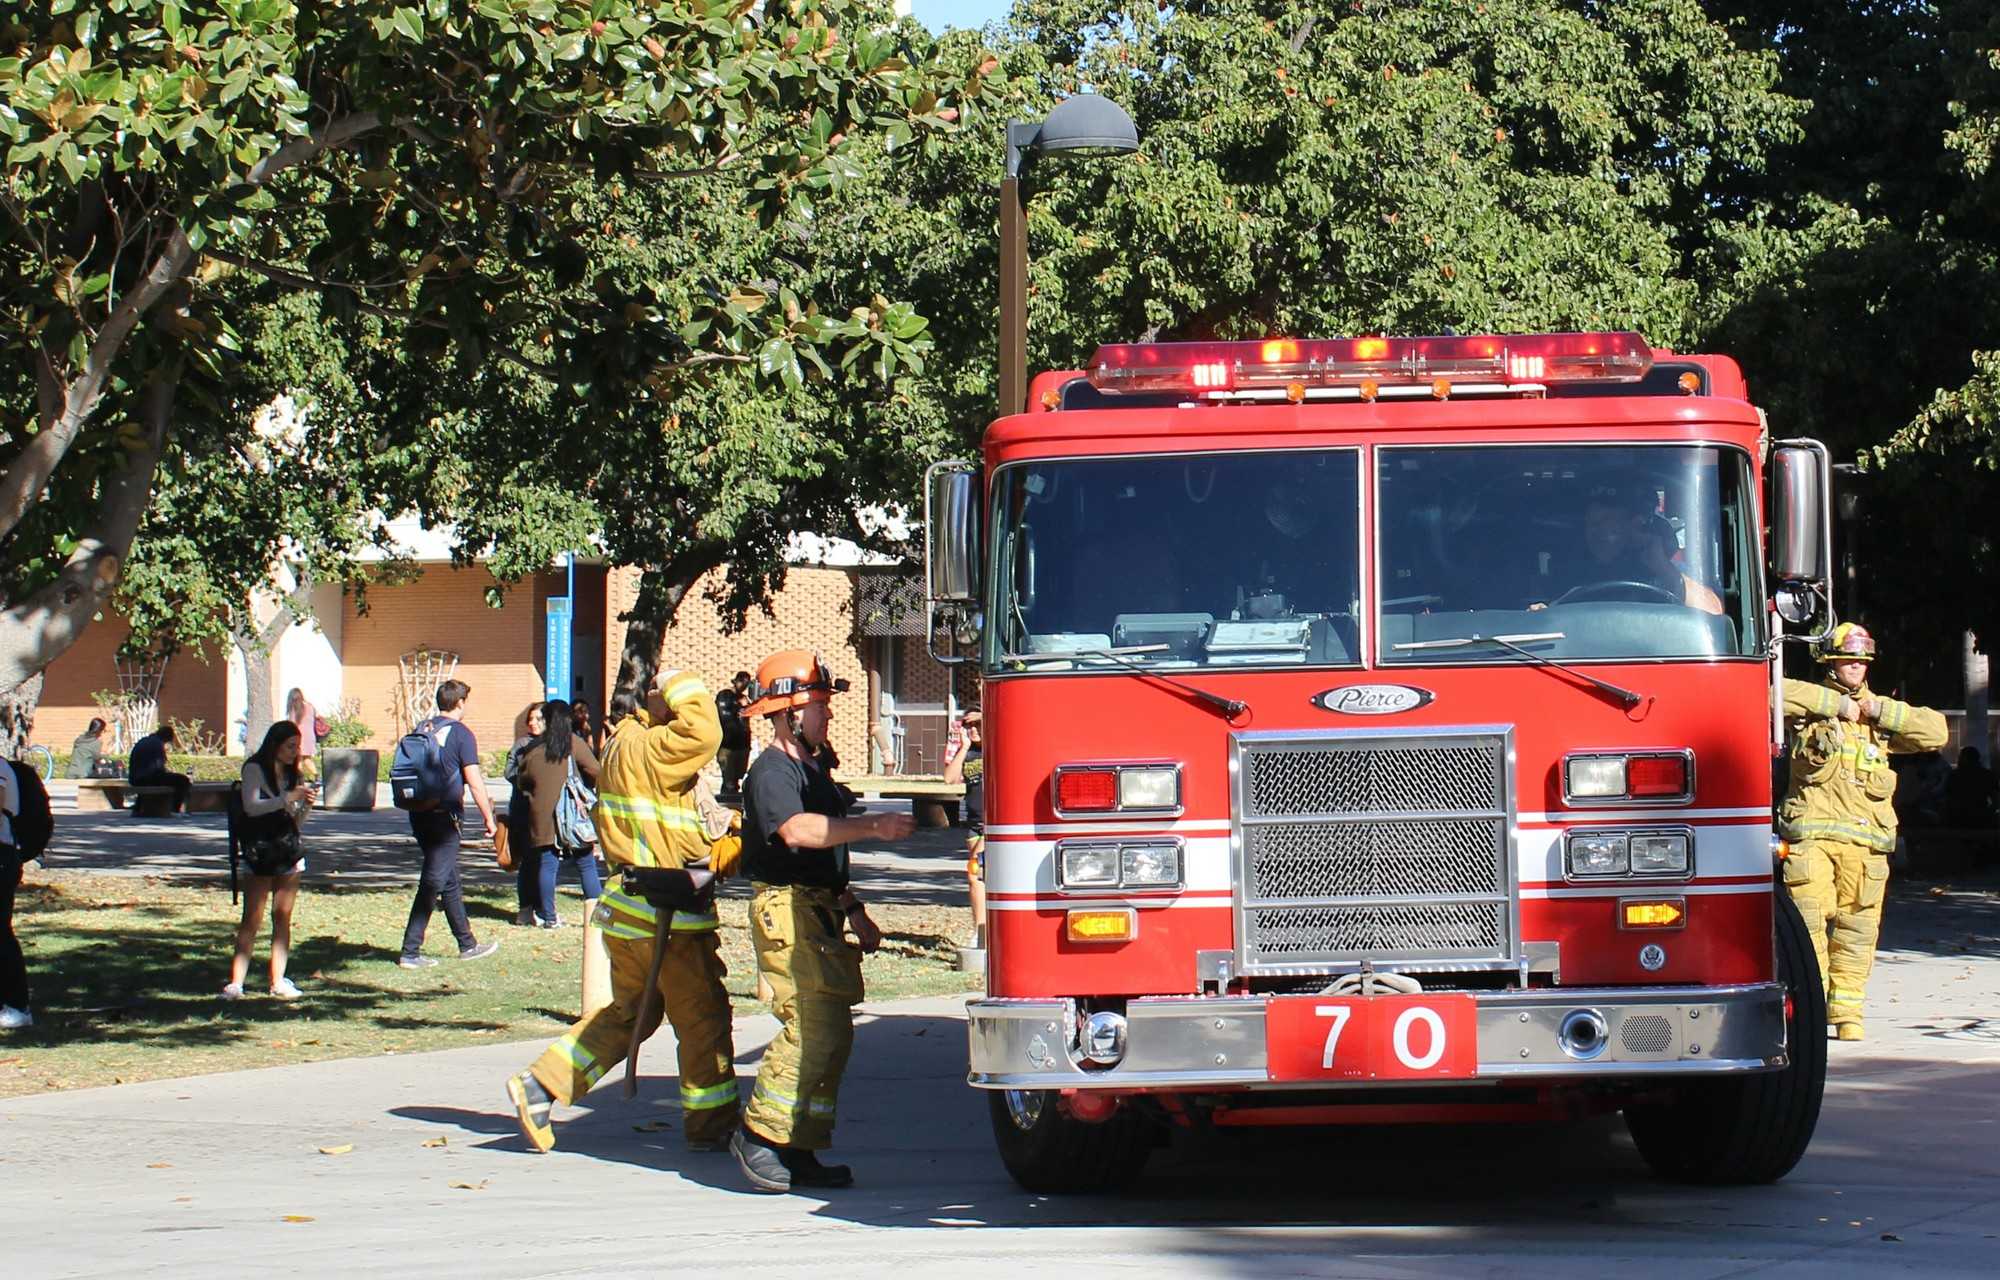 Firefighters pictured at CSUN